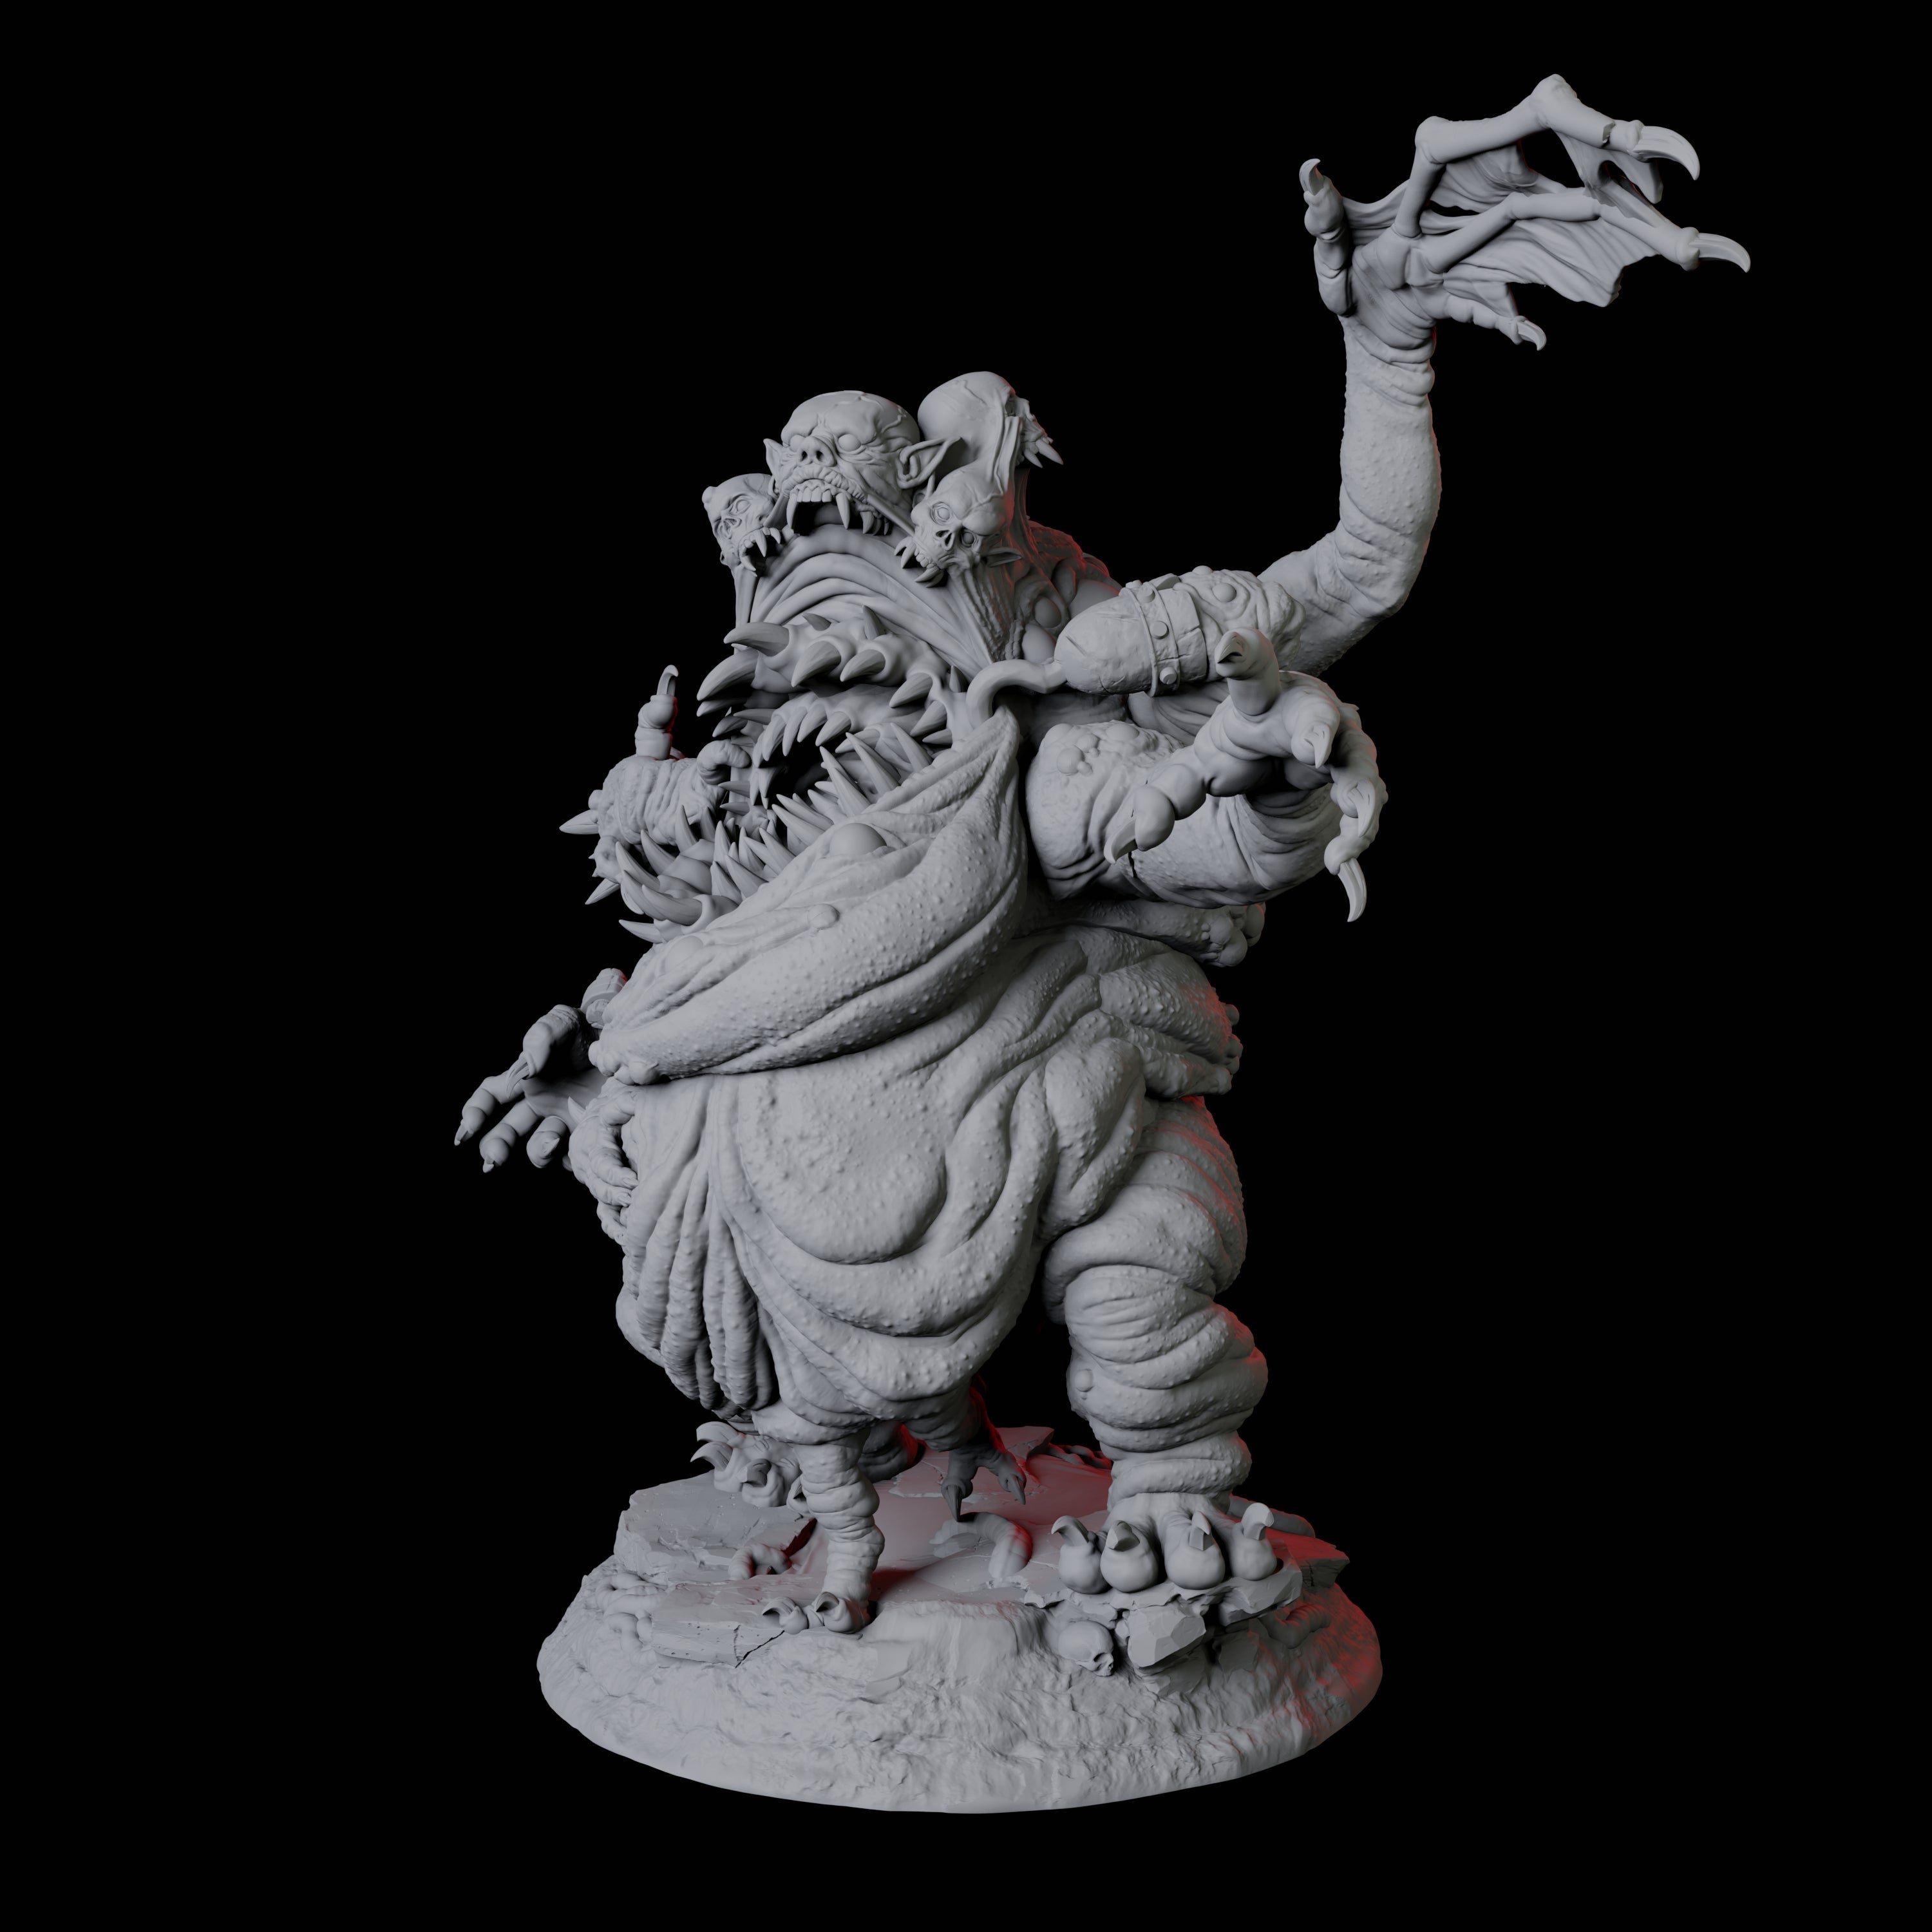 Fleshwarped Irnakurse A Miniature for Dungeons and Dragons, Pathfinder or other TTRPGs